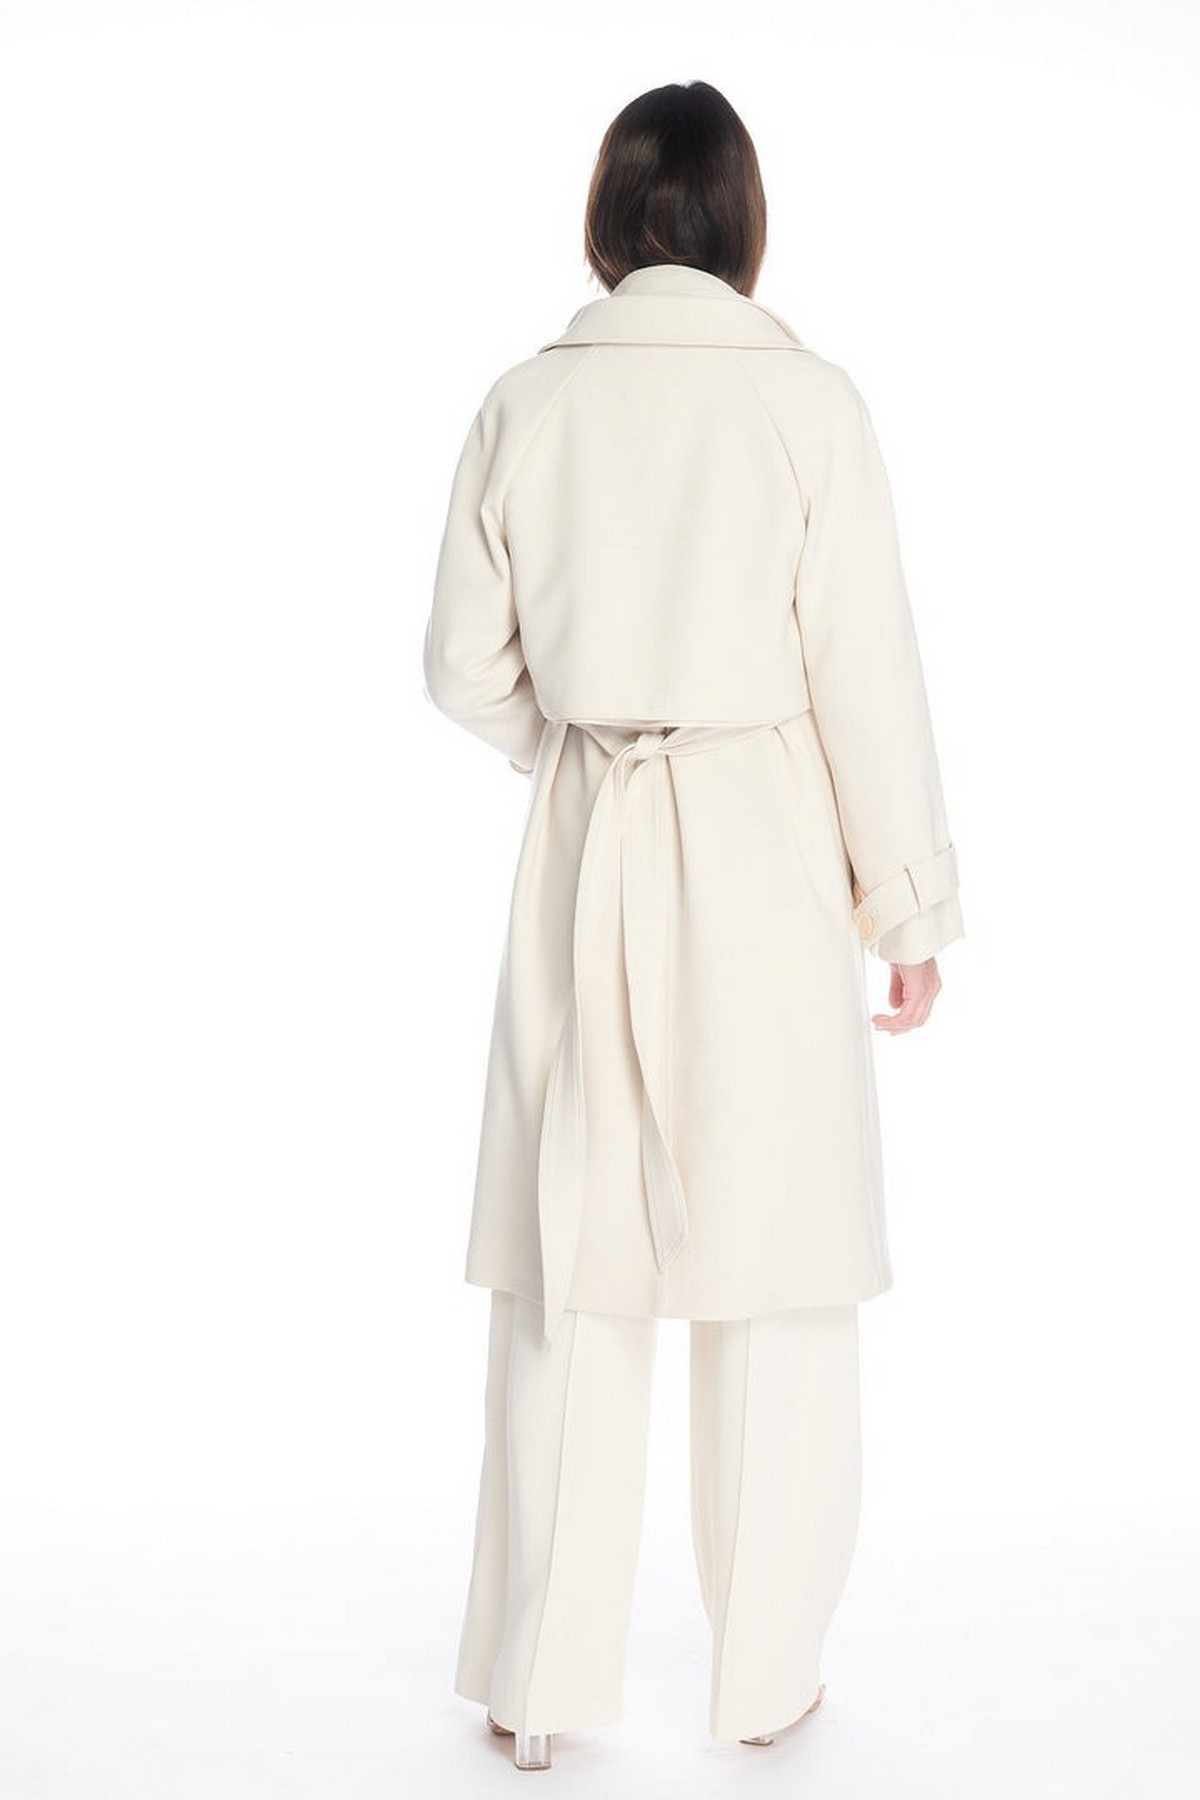 Oscar the collection - Odile coat - 3 in 1 coat sand